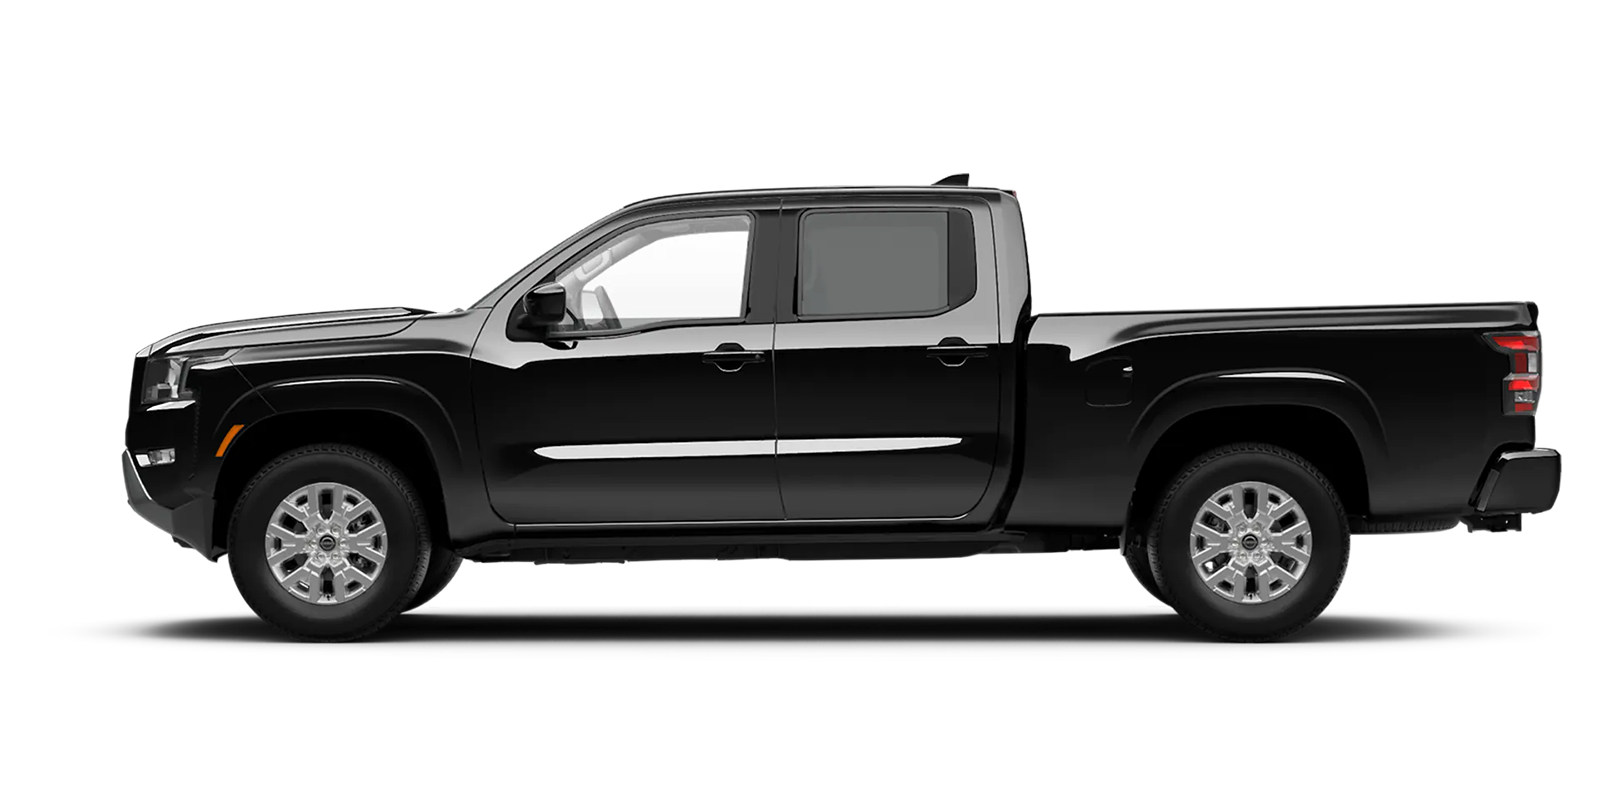 2022 Frontier Crew Cab Long Bed SV 4x2 in Super Black | Rusty Wallace Nissan in Knoxville TN